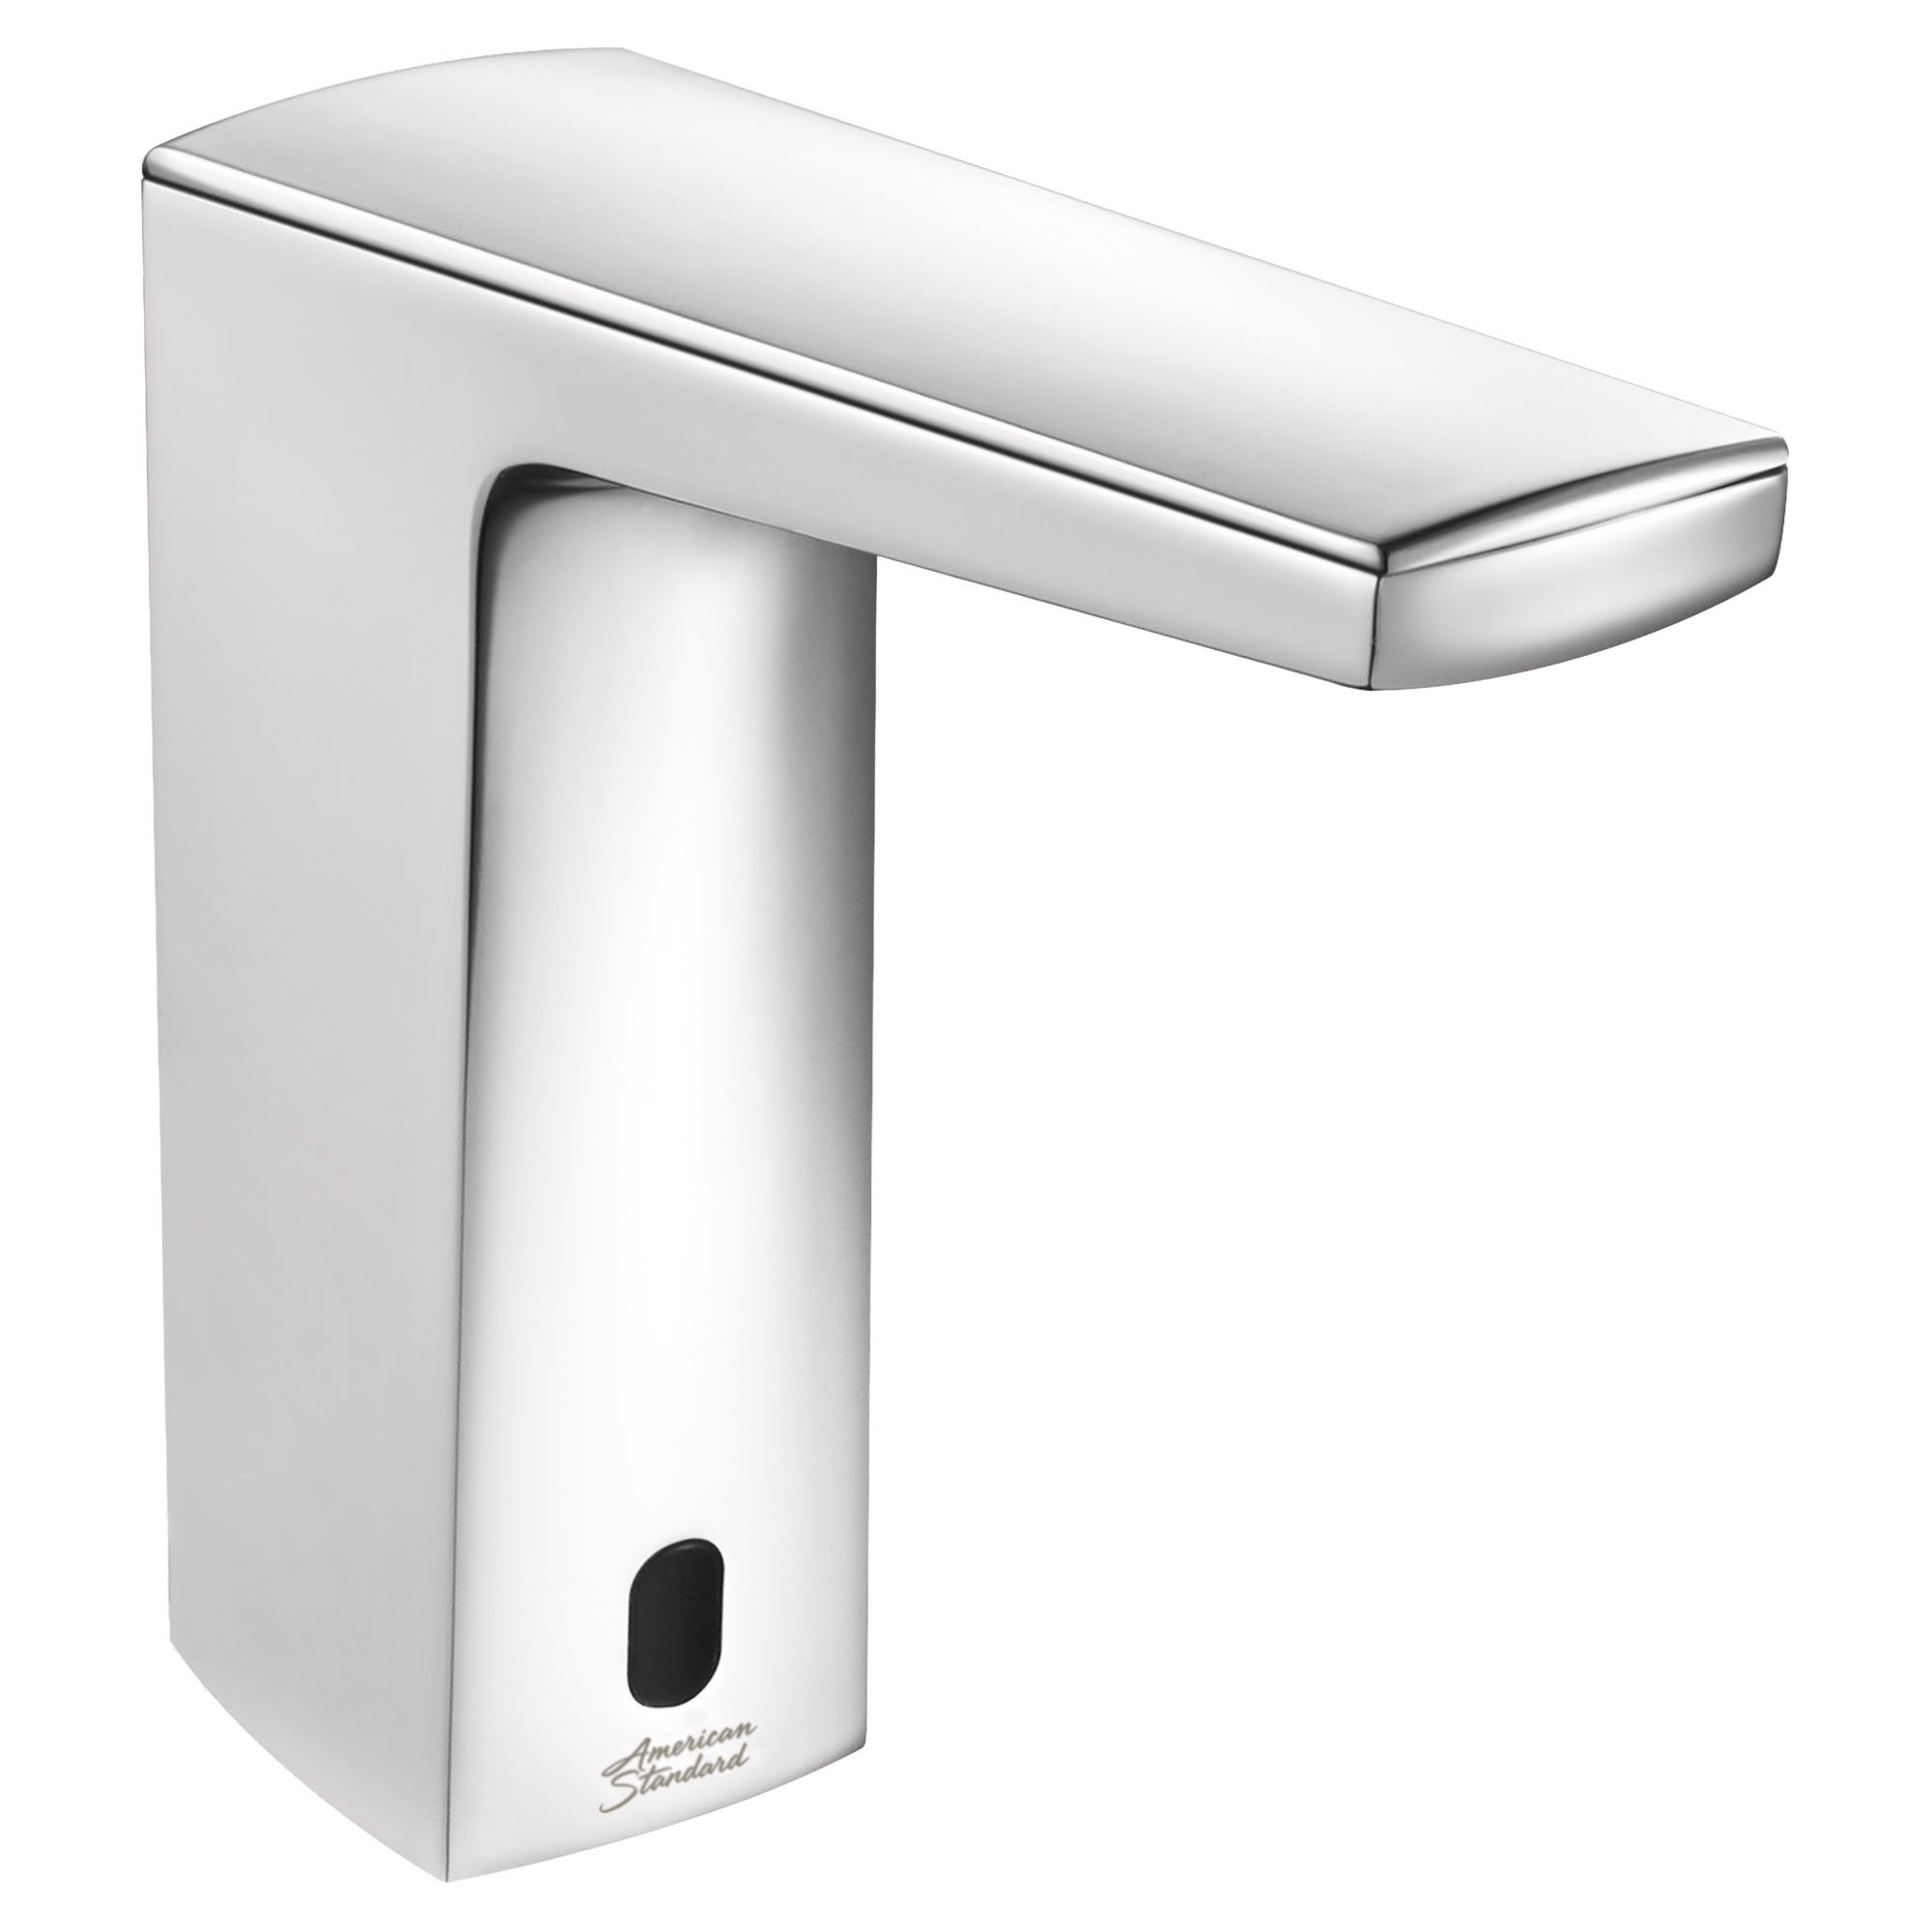 Paradigm™ Selectronic™ Touchless Faucet, Base Model With SmarTherm Safety Shut-Off + ADM, 1.5 gpm/5.7 Lpm